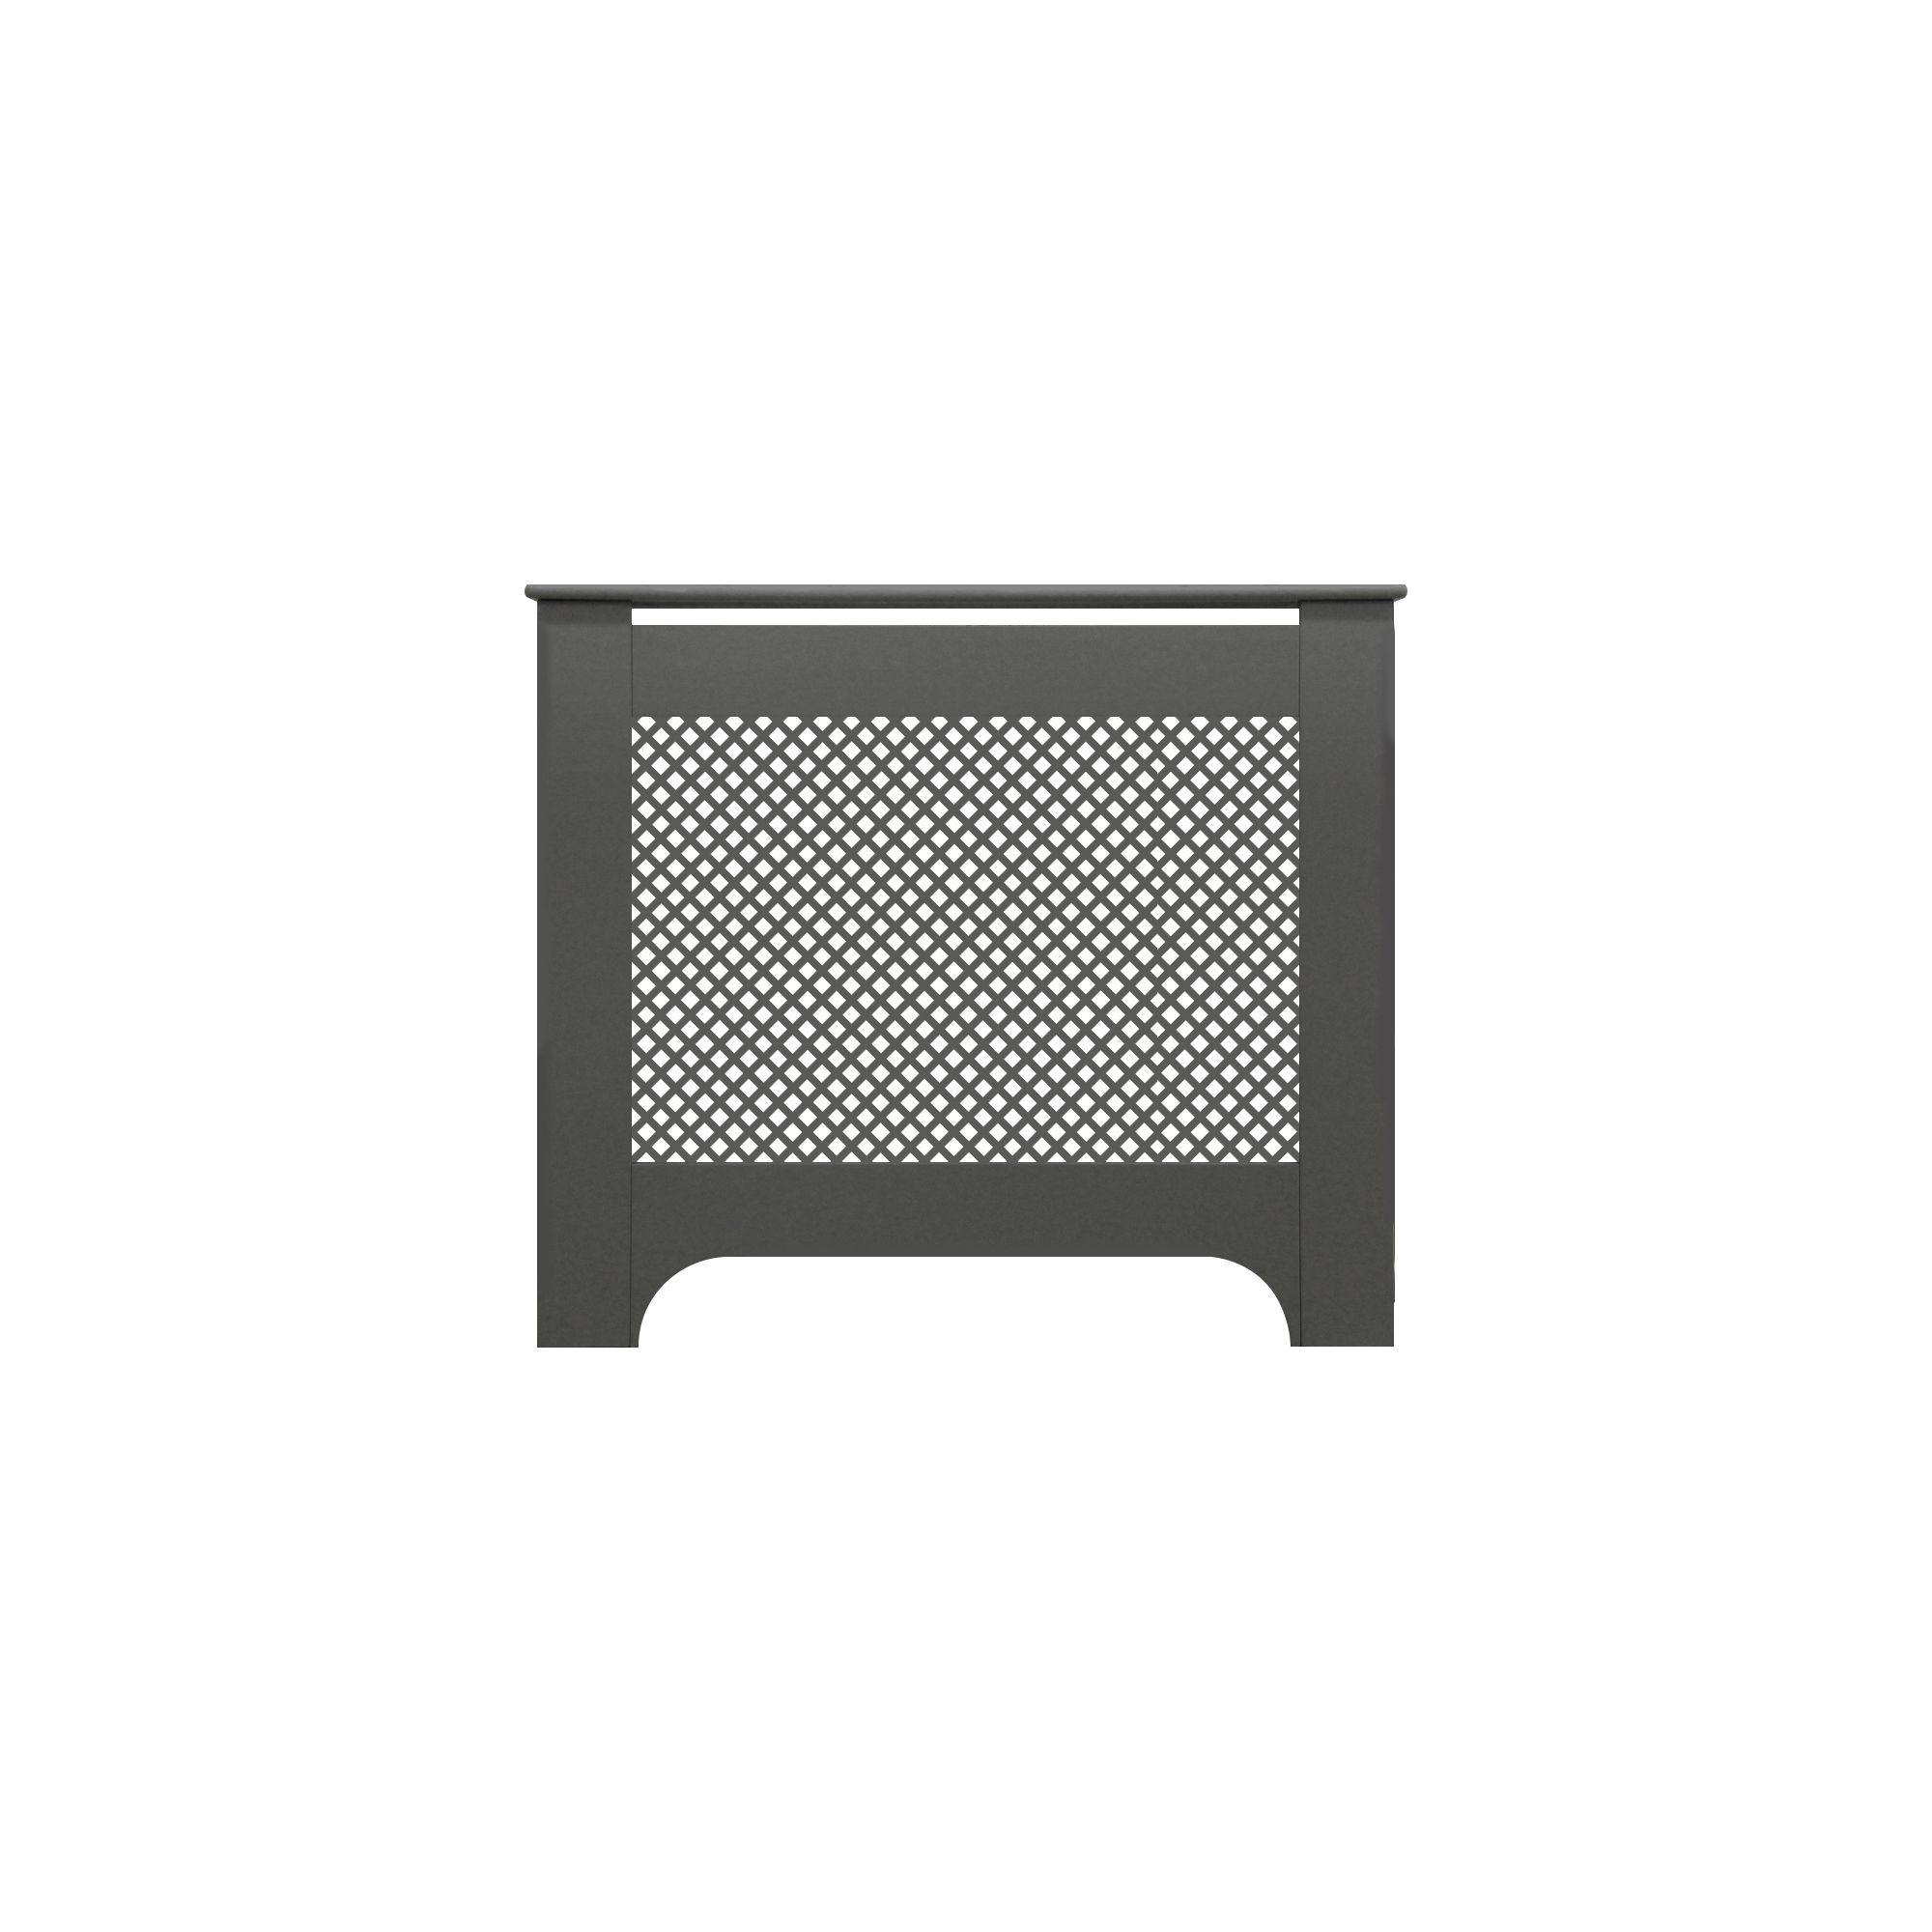 Mayfair Small Grey Radiator cover 815mm(H) 950mm(W) 190mm(D)